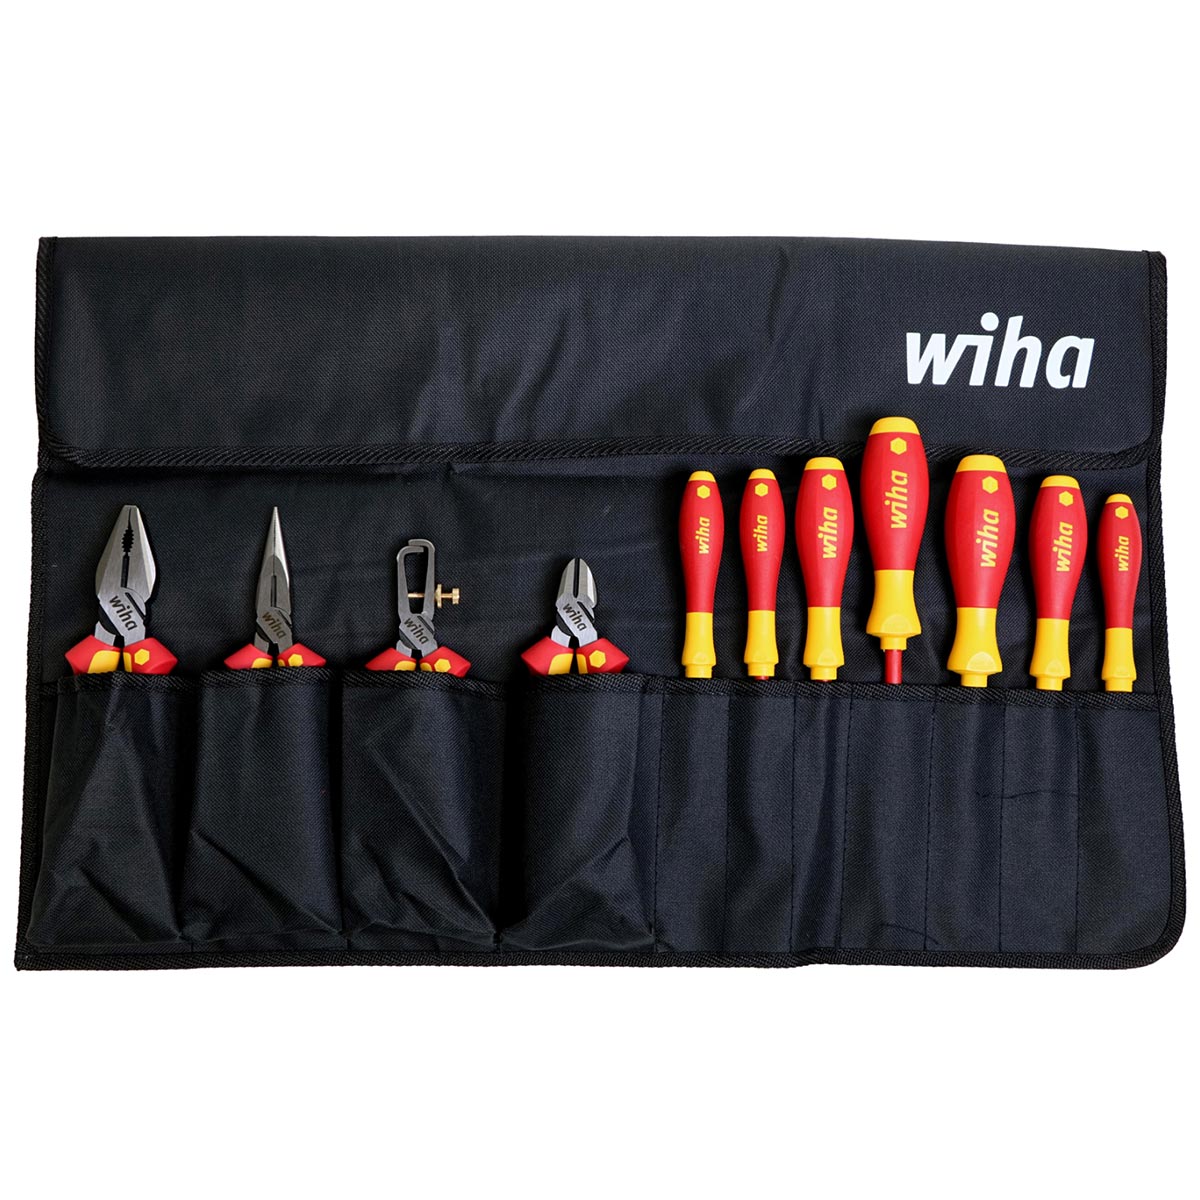 Wiha Insulated Pliers Cutters And Screwdriver - 11 Piece Set